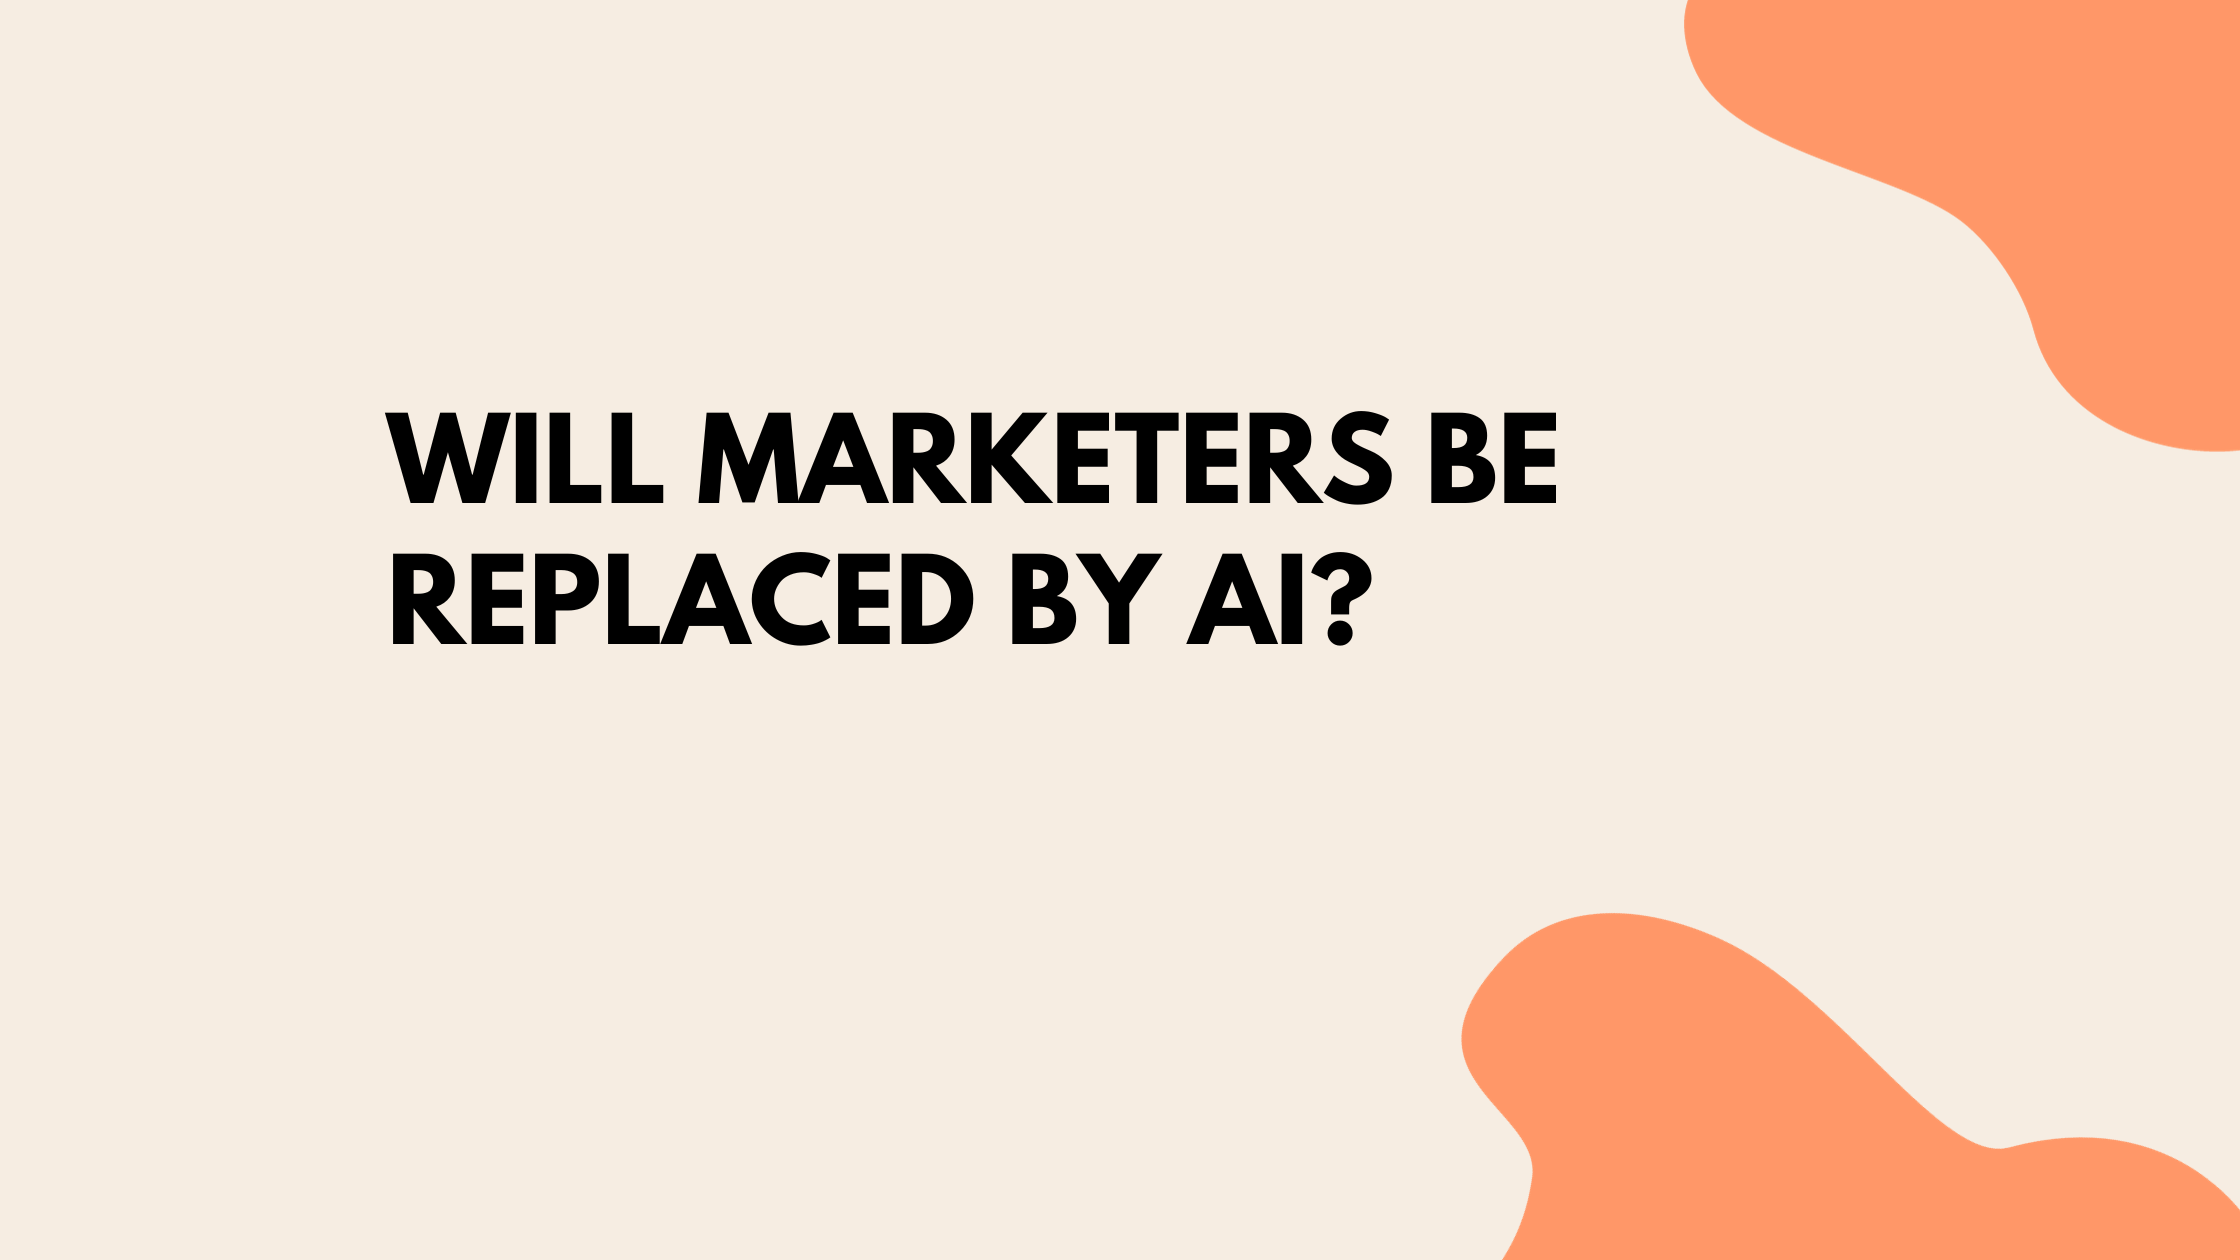 Will marketers be replaced by AI?